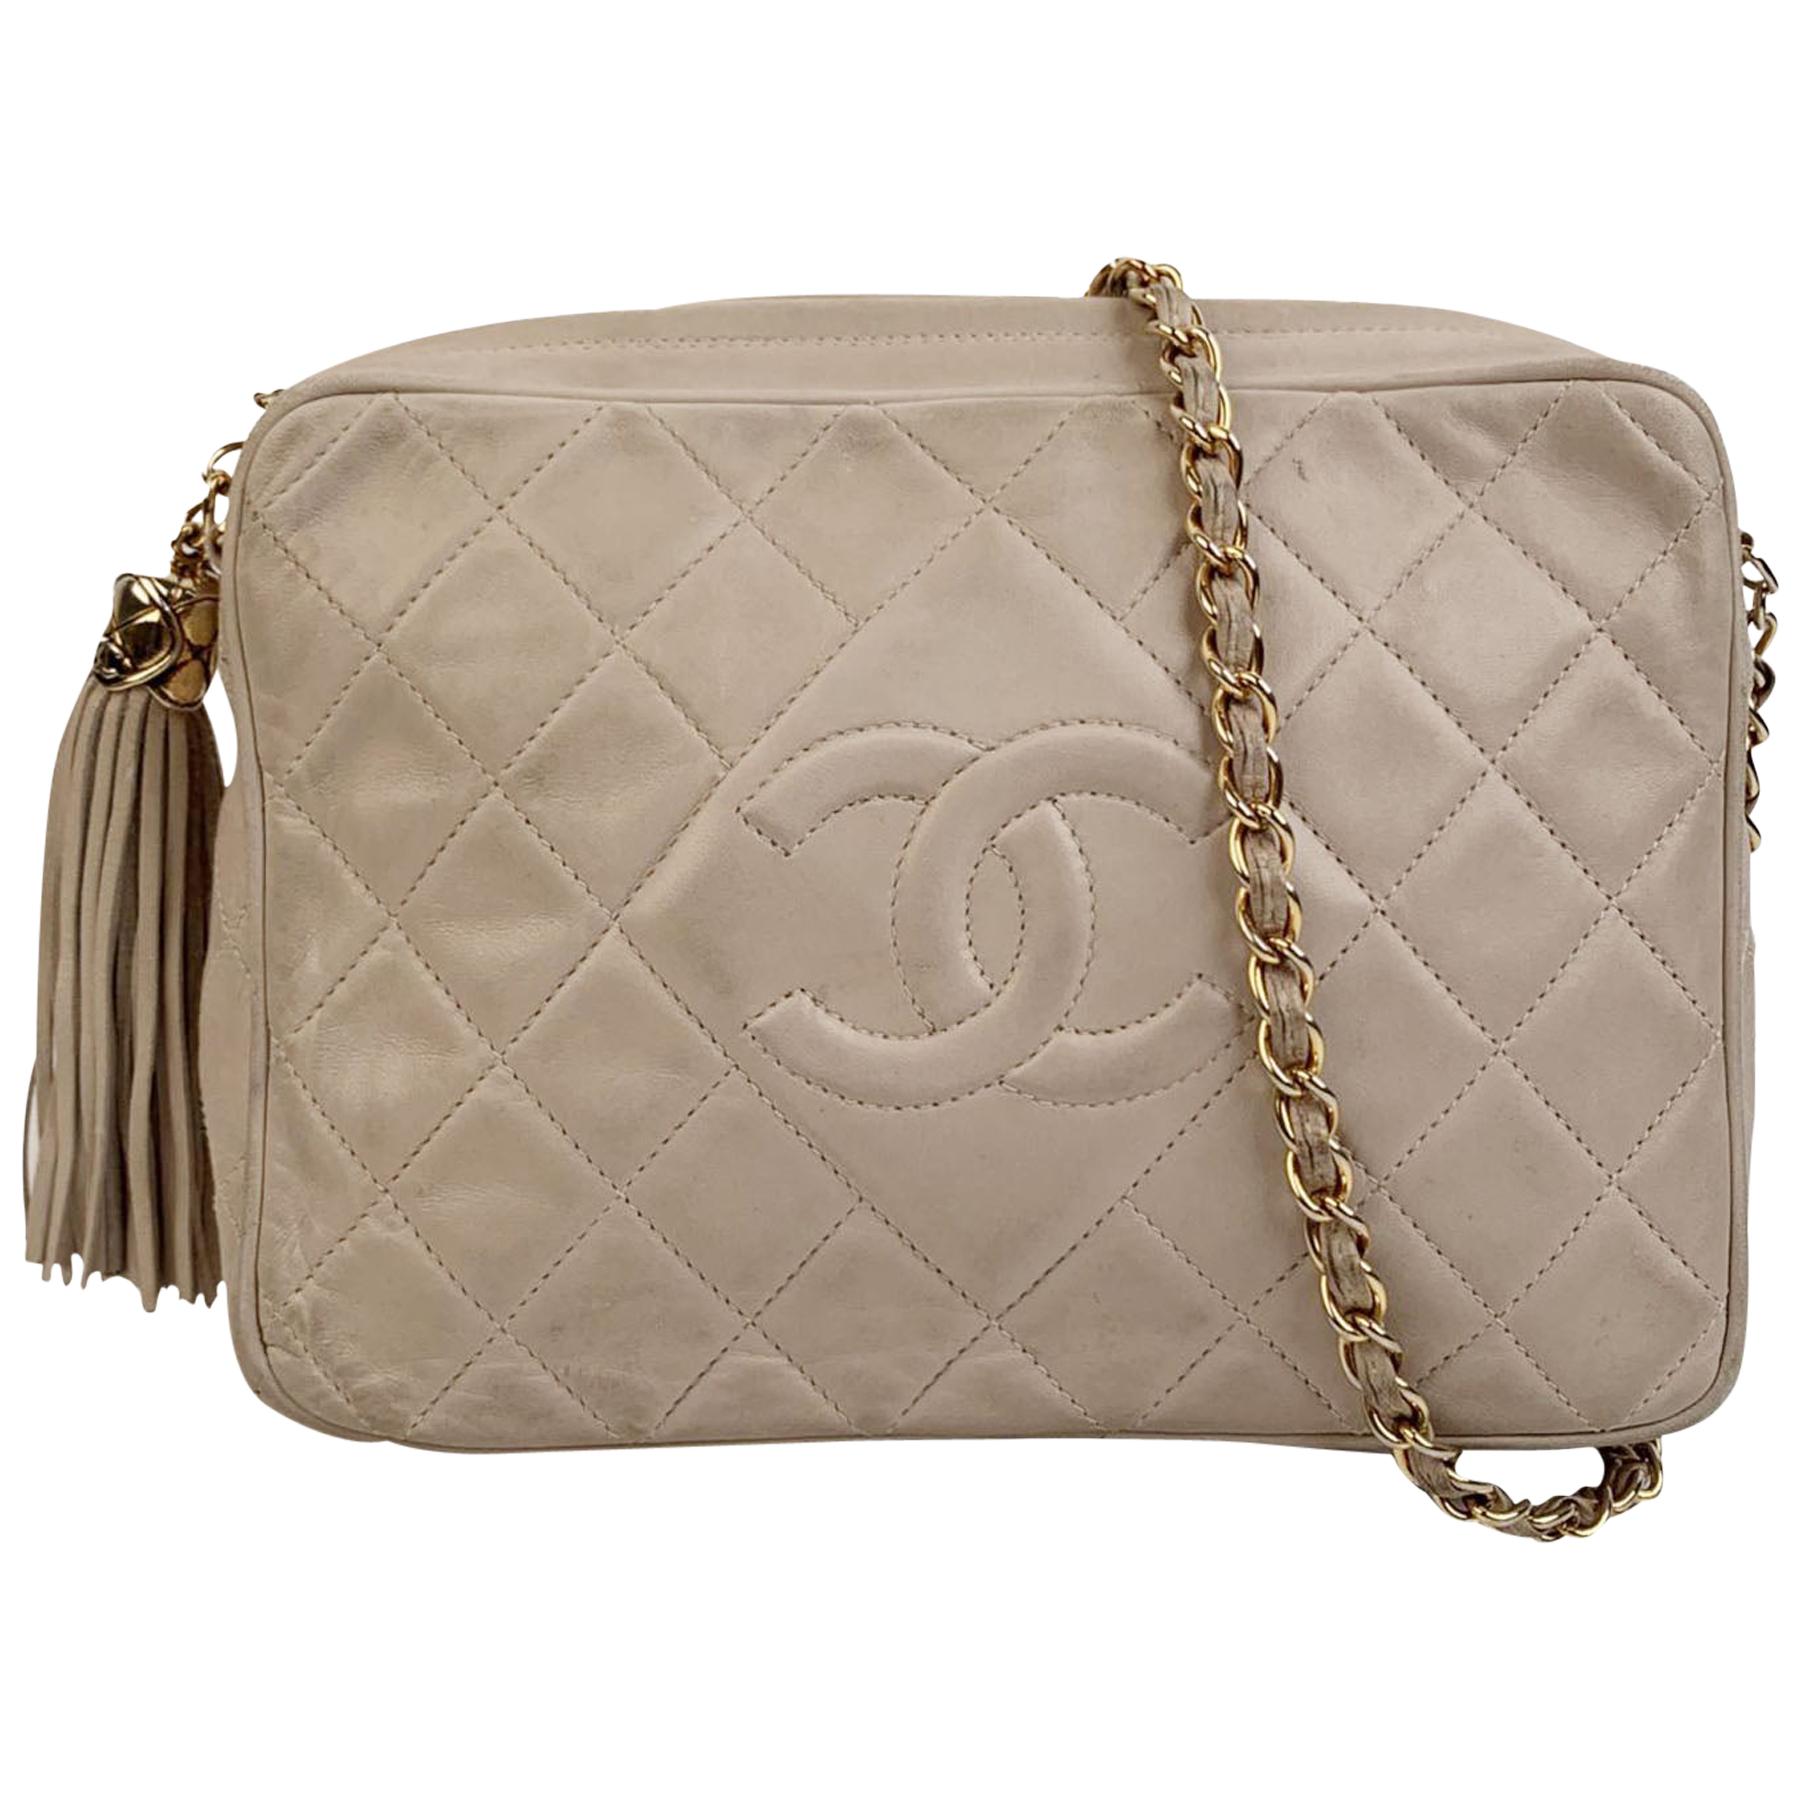 Chanel Vintage Ivory Quilted Leather CC Logo Camera Bag with Tassel